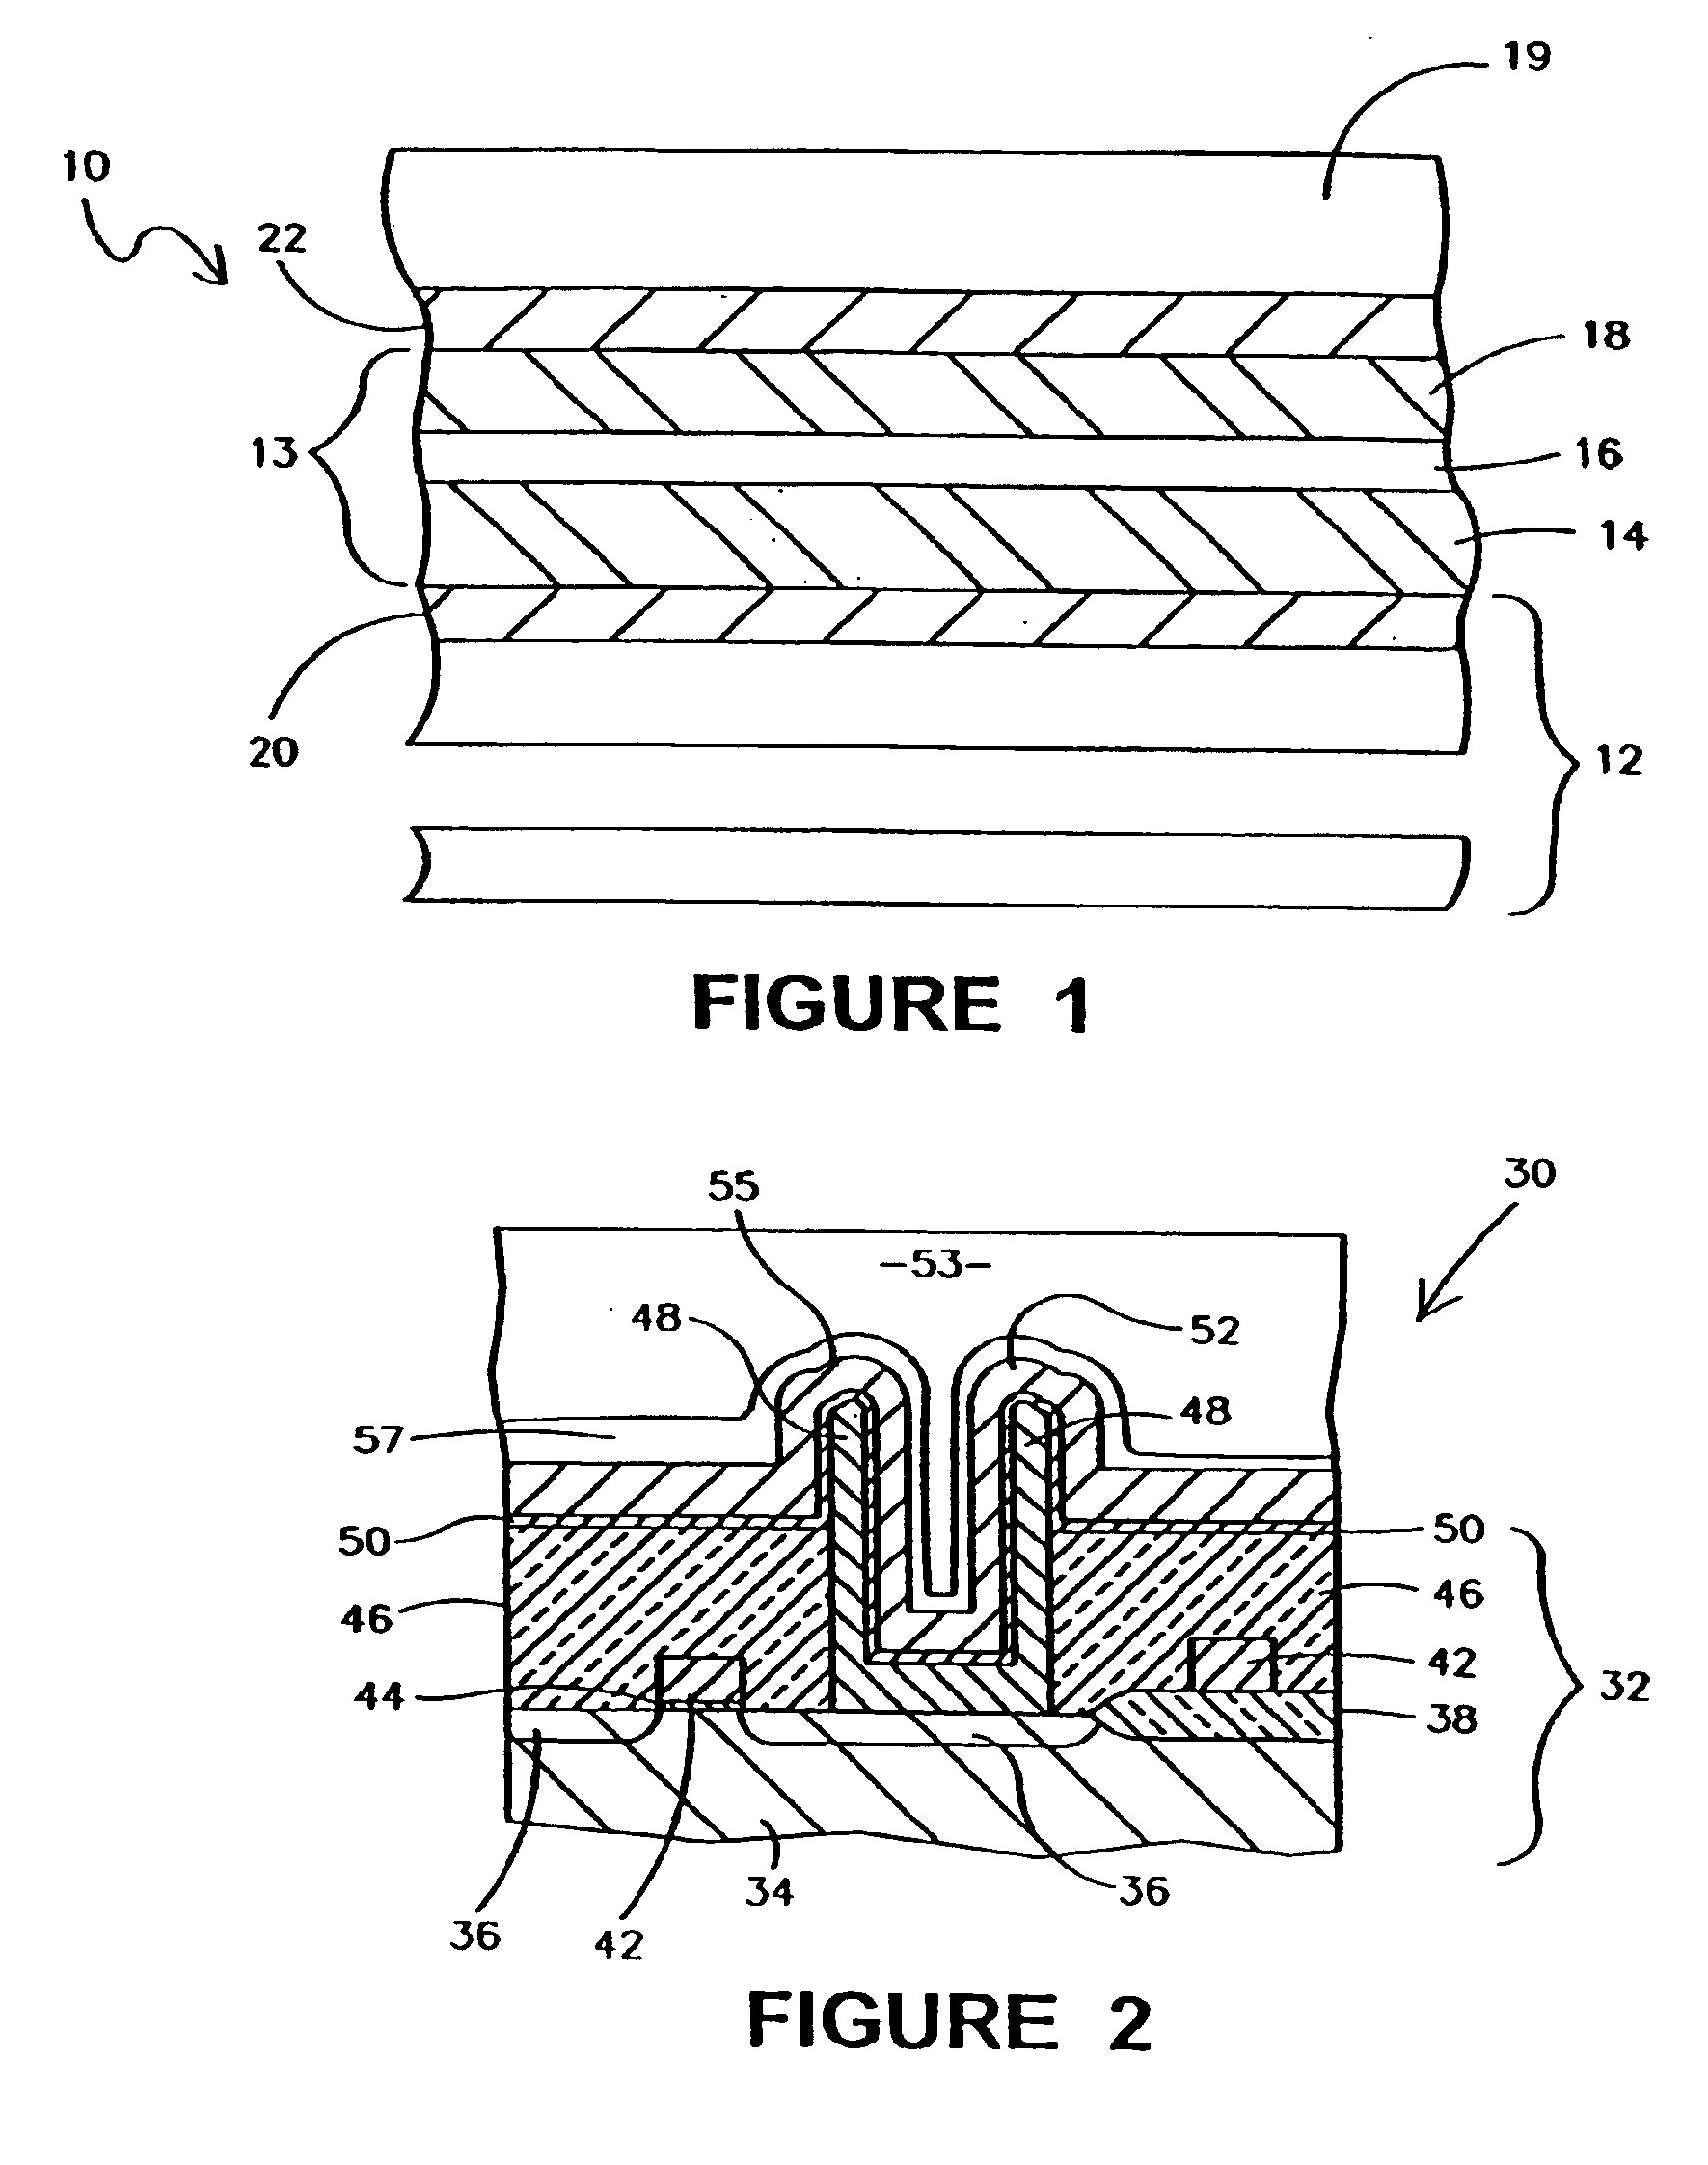 Methods for use in forming a capacitor and structures resulting from same